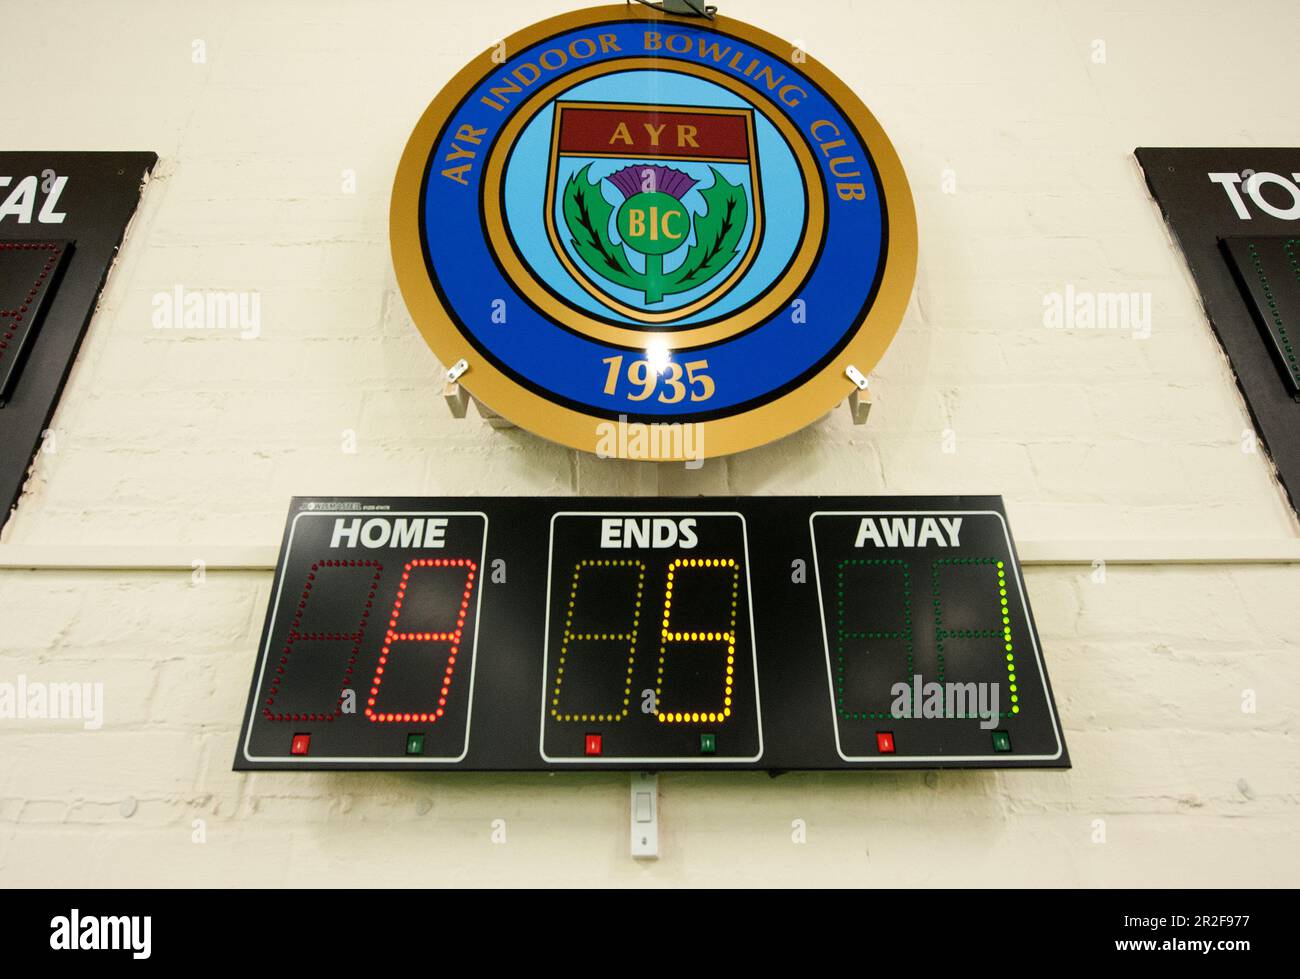 The scoreboard at the Ayr Indoor lawn bowling Green in Scotland Stock Photo